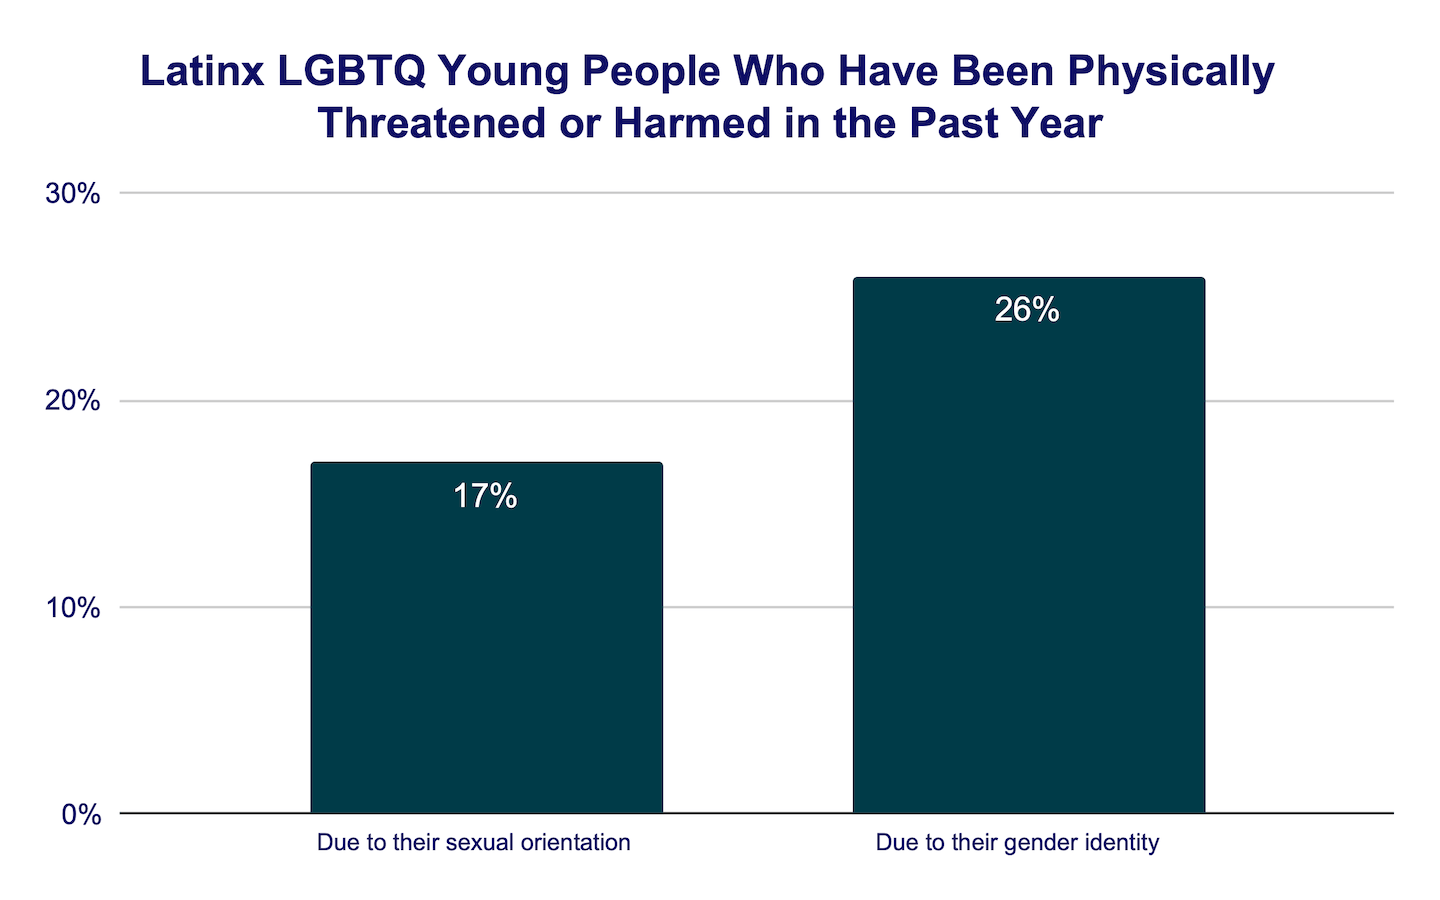 Latinx LGBTQ young people who have been physically threatened or harmed in the past year